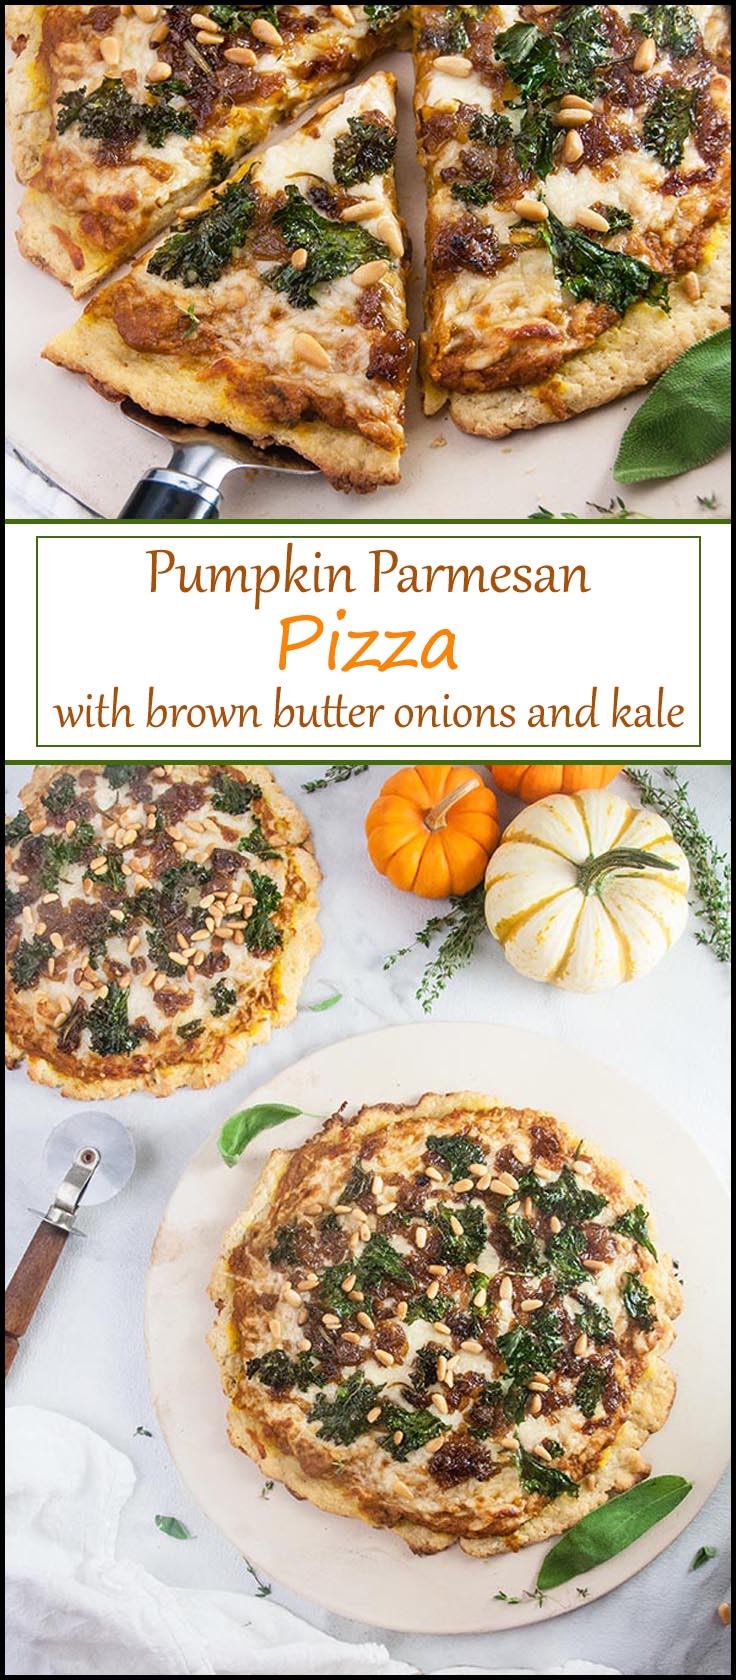 The Perfect Fall Pizza: Pumpkin Parmesan Pizza with Brown Butter Caramelized Onions and Kale